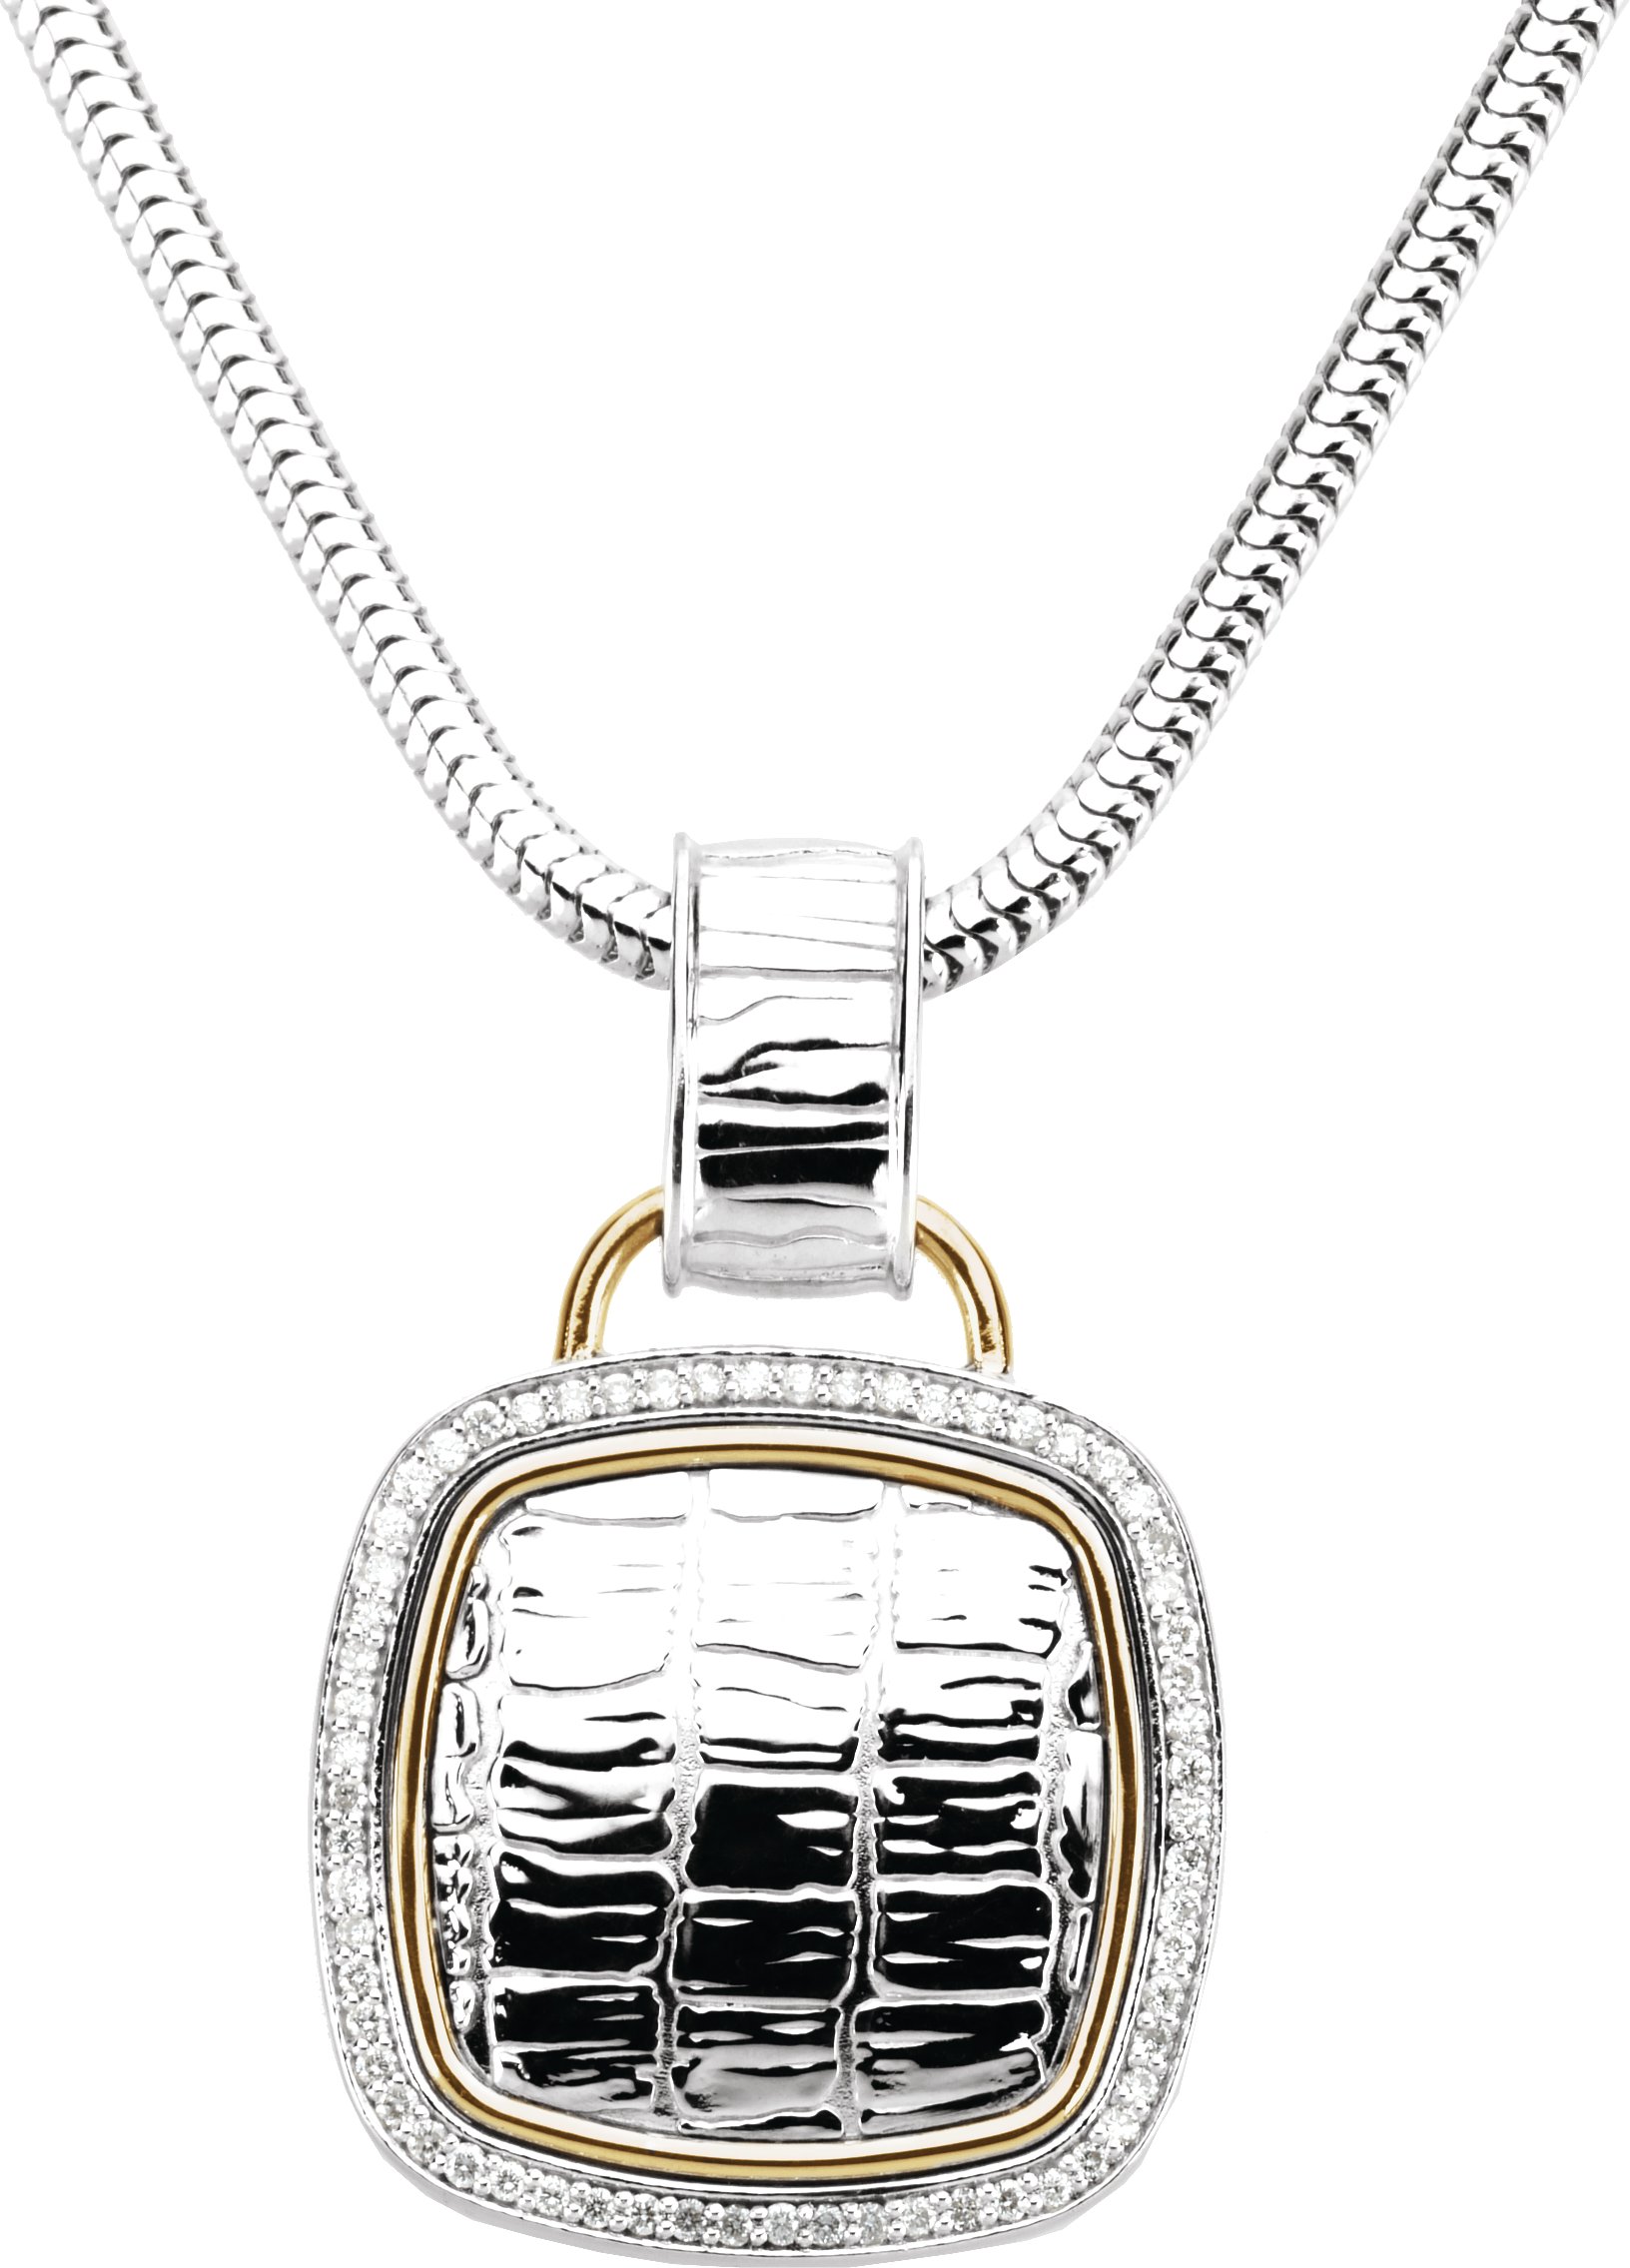 Sterling Silver and 14K Yellow .33 CTW Diamond Alligator Skin Design 18 inch Necklace Ref. 2477201